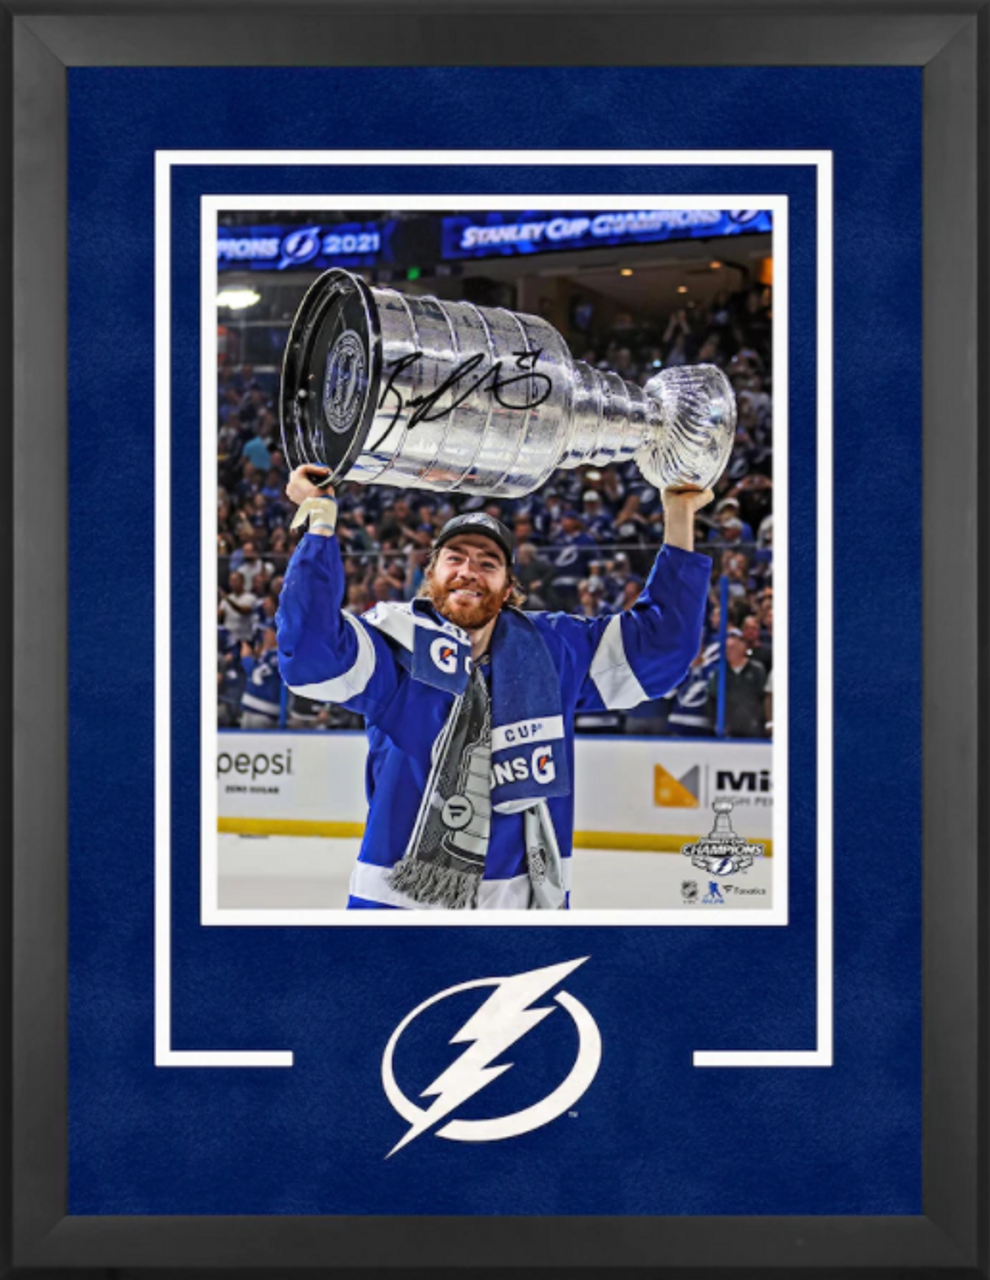 Tampa Bay Lightning Fanatics Authentic 2021 Stanley Cup